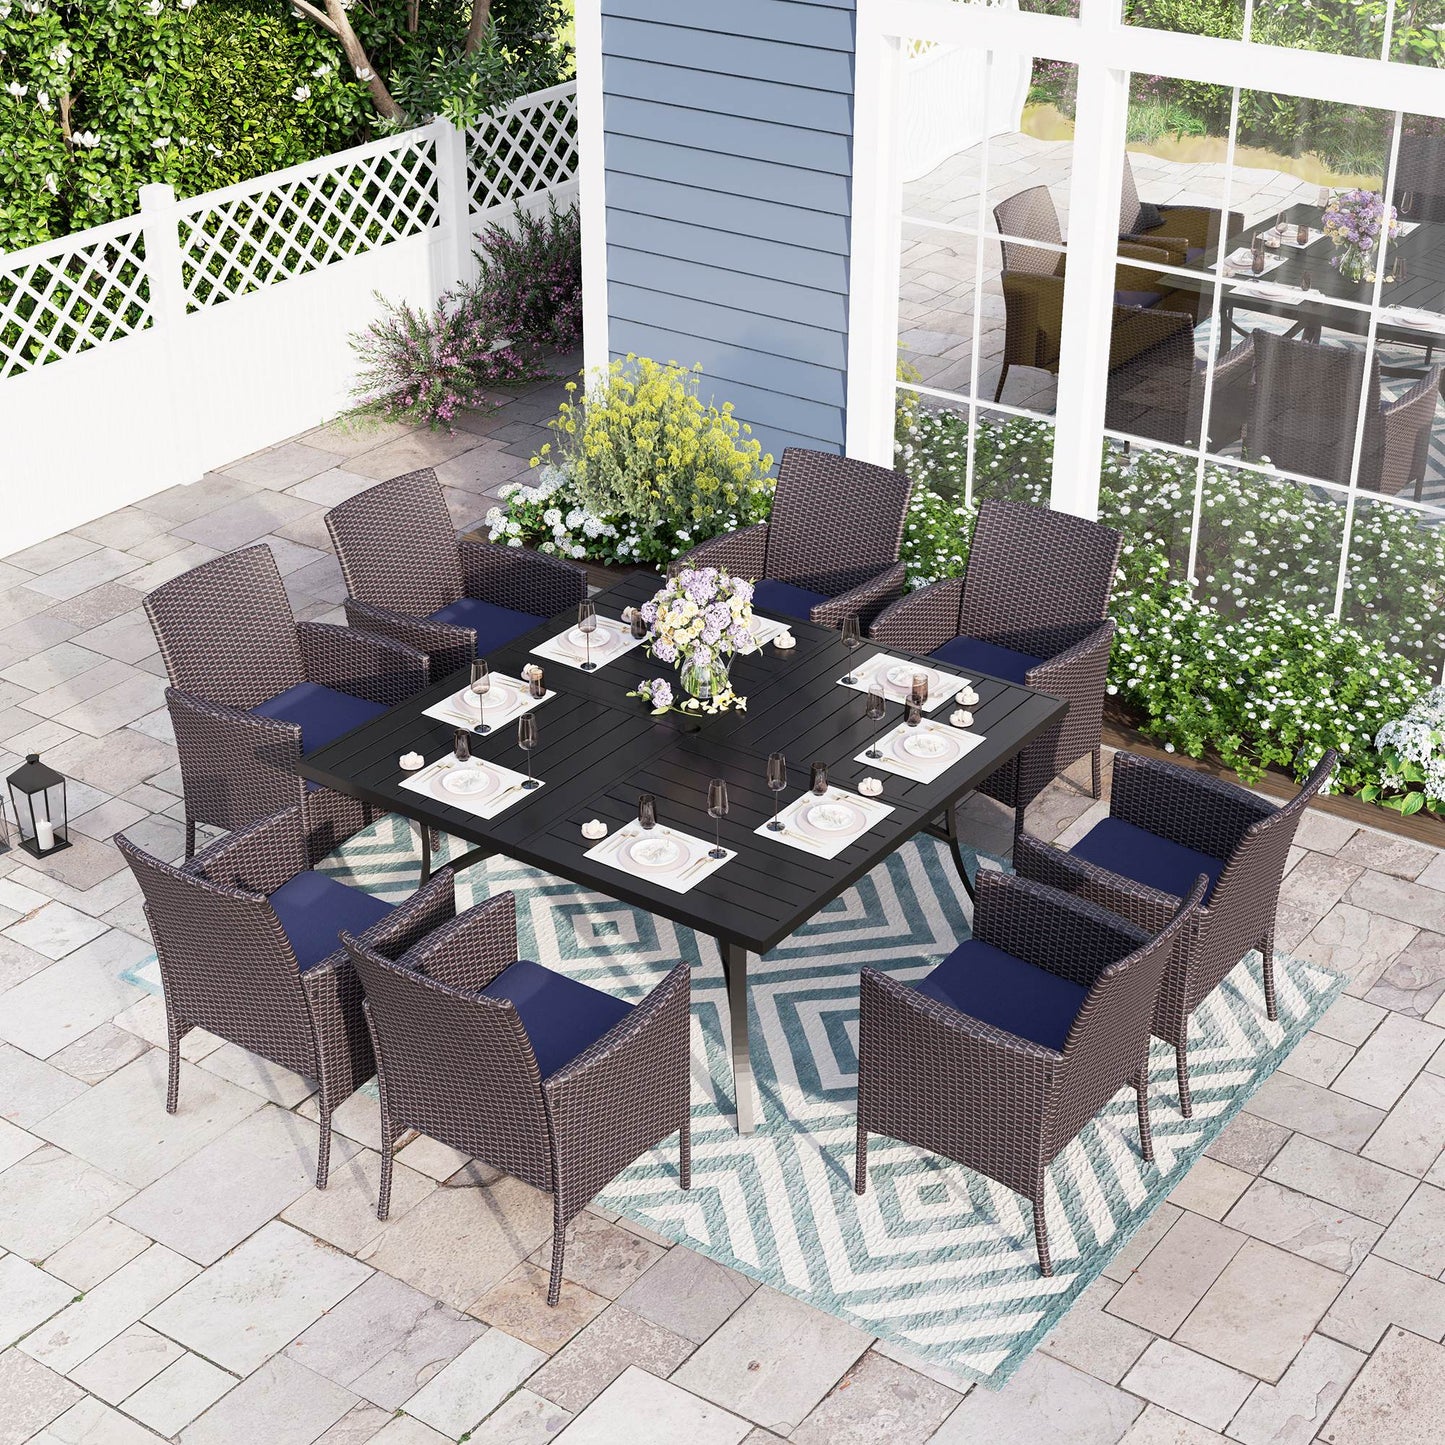 Sophia & William 9 Pieces Outdoor Patio Dining Set Rattan Wicker Chairs and Large Square Metal Table Set